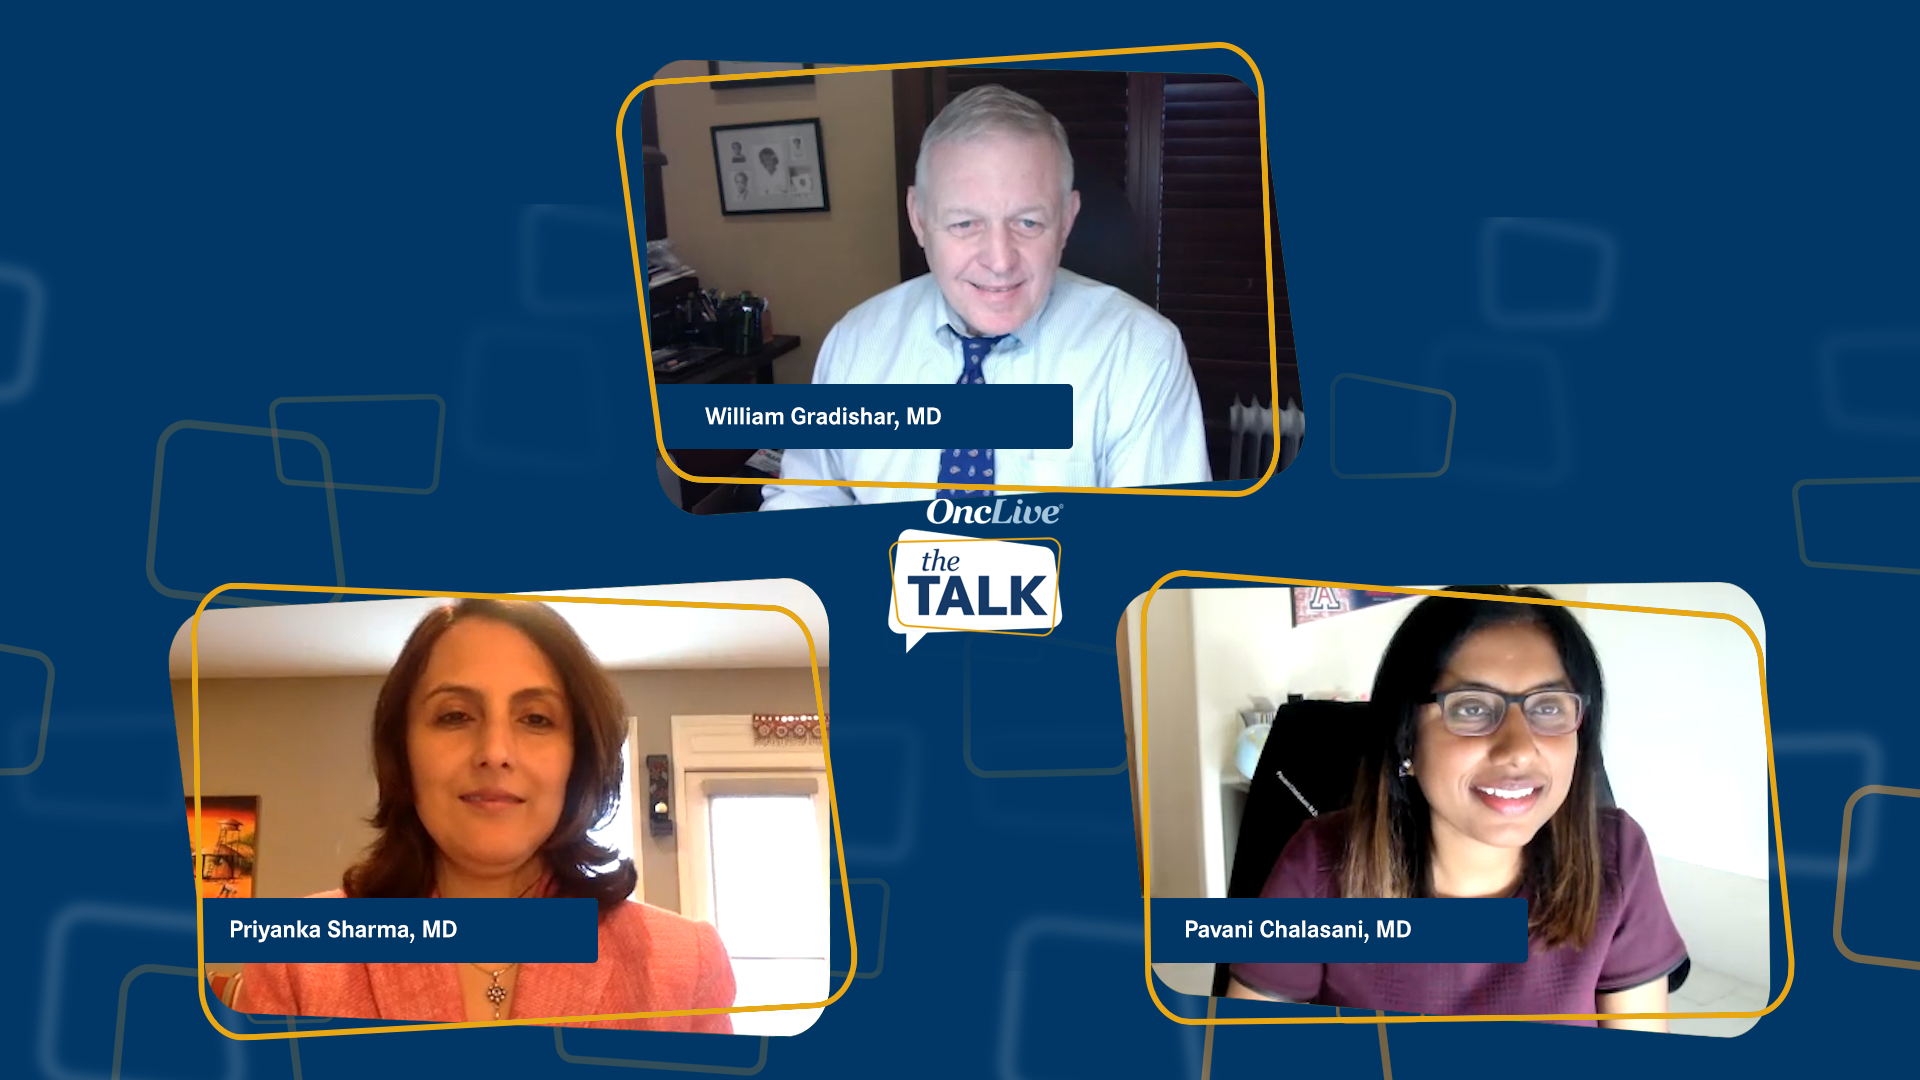 “Breast Cancer Talk” Review of Data from the SABCS 2020 Virtual Meeting